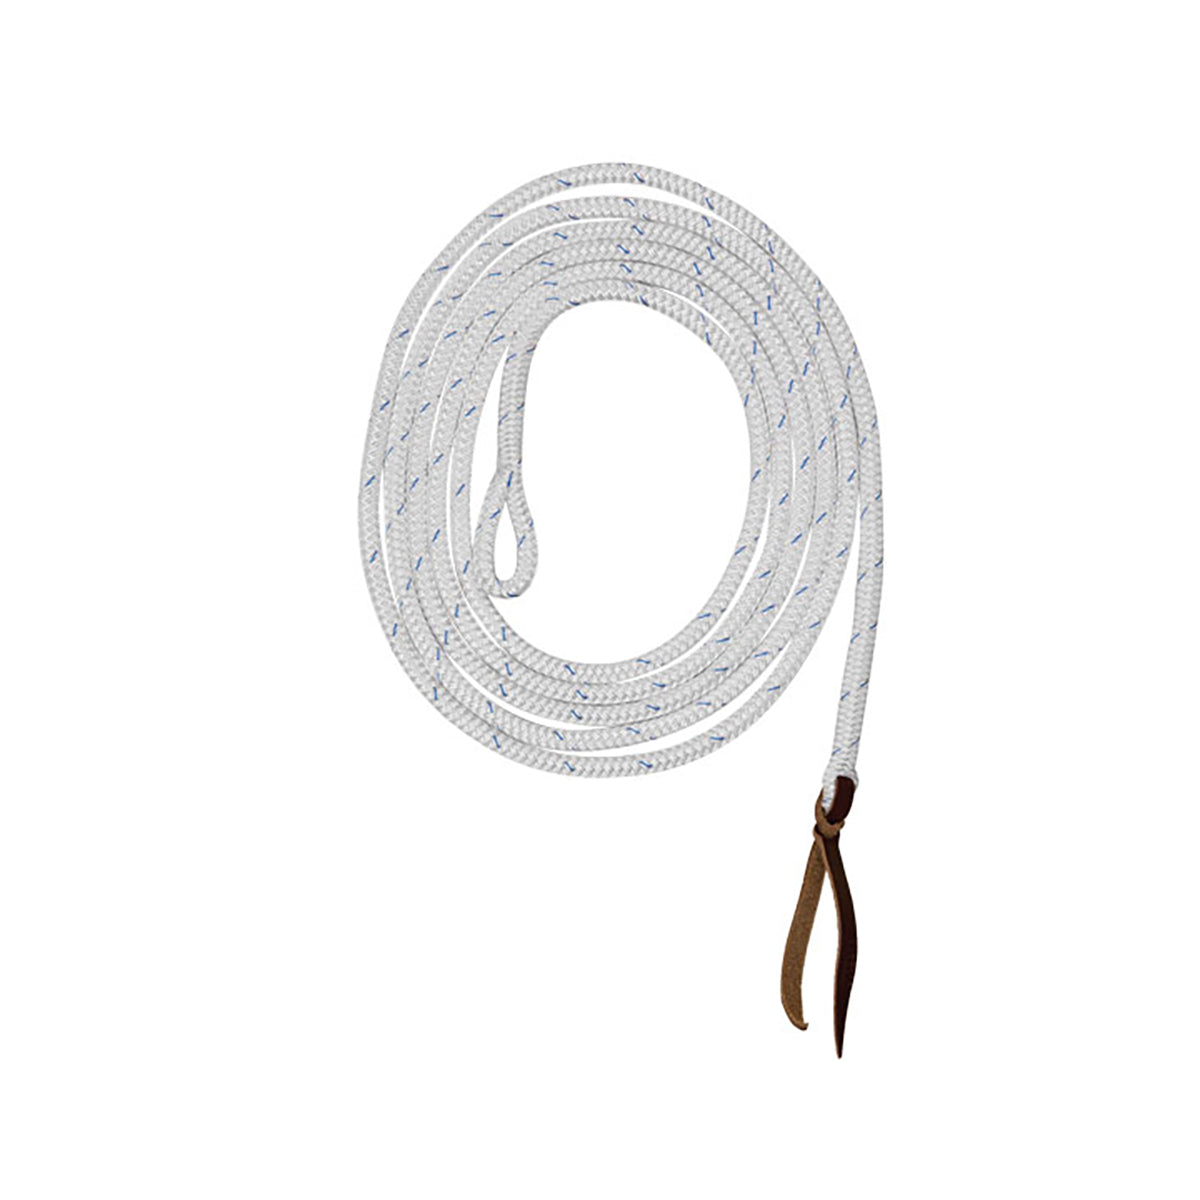 Parelli Savvy String - Adult, White, One Size